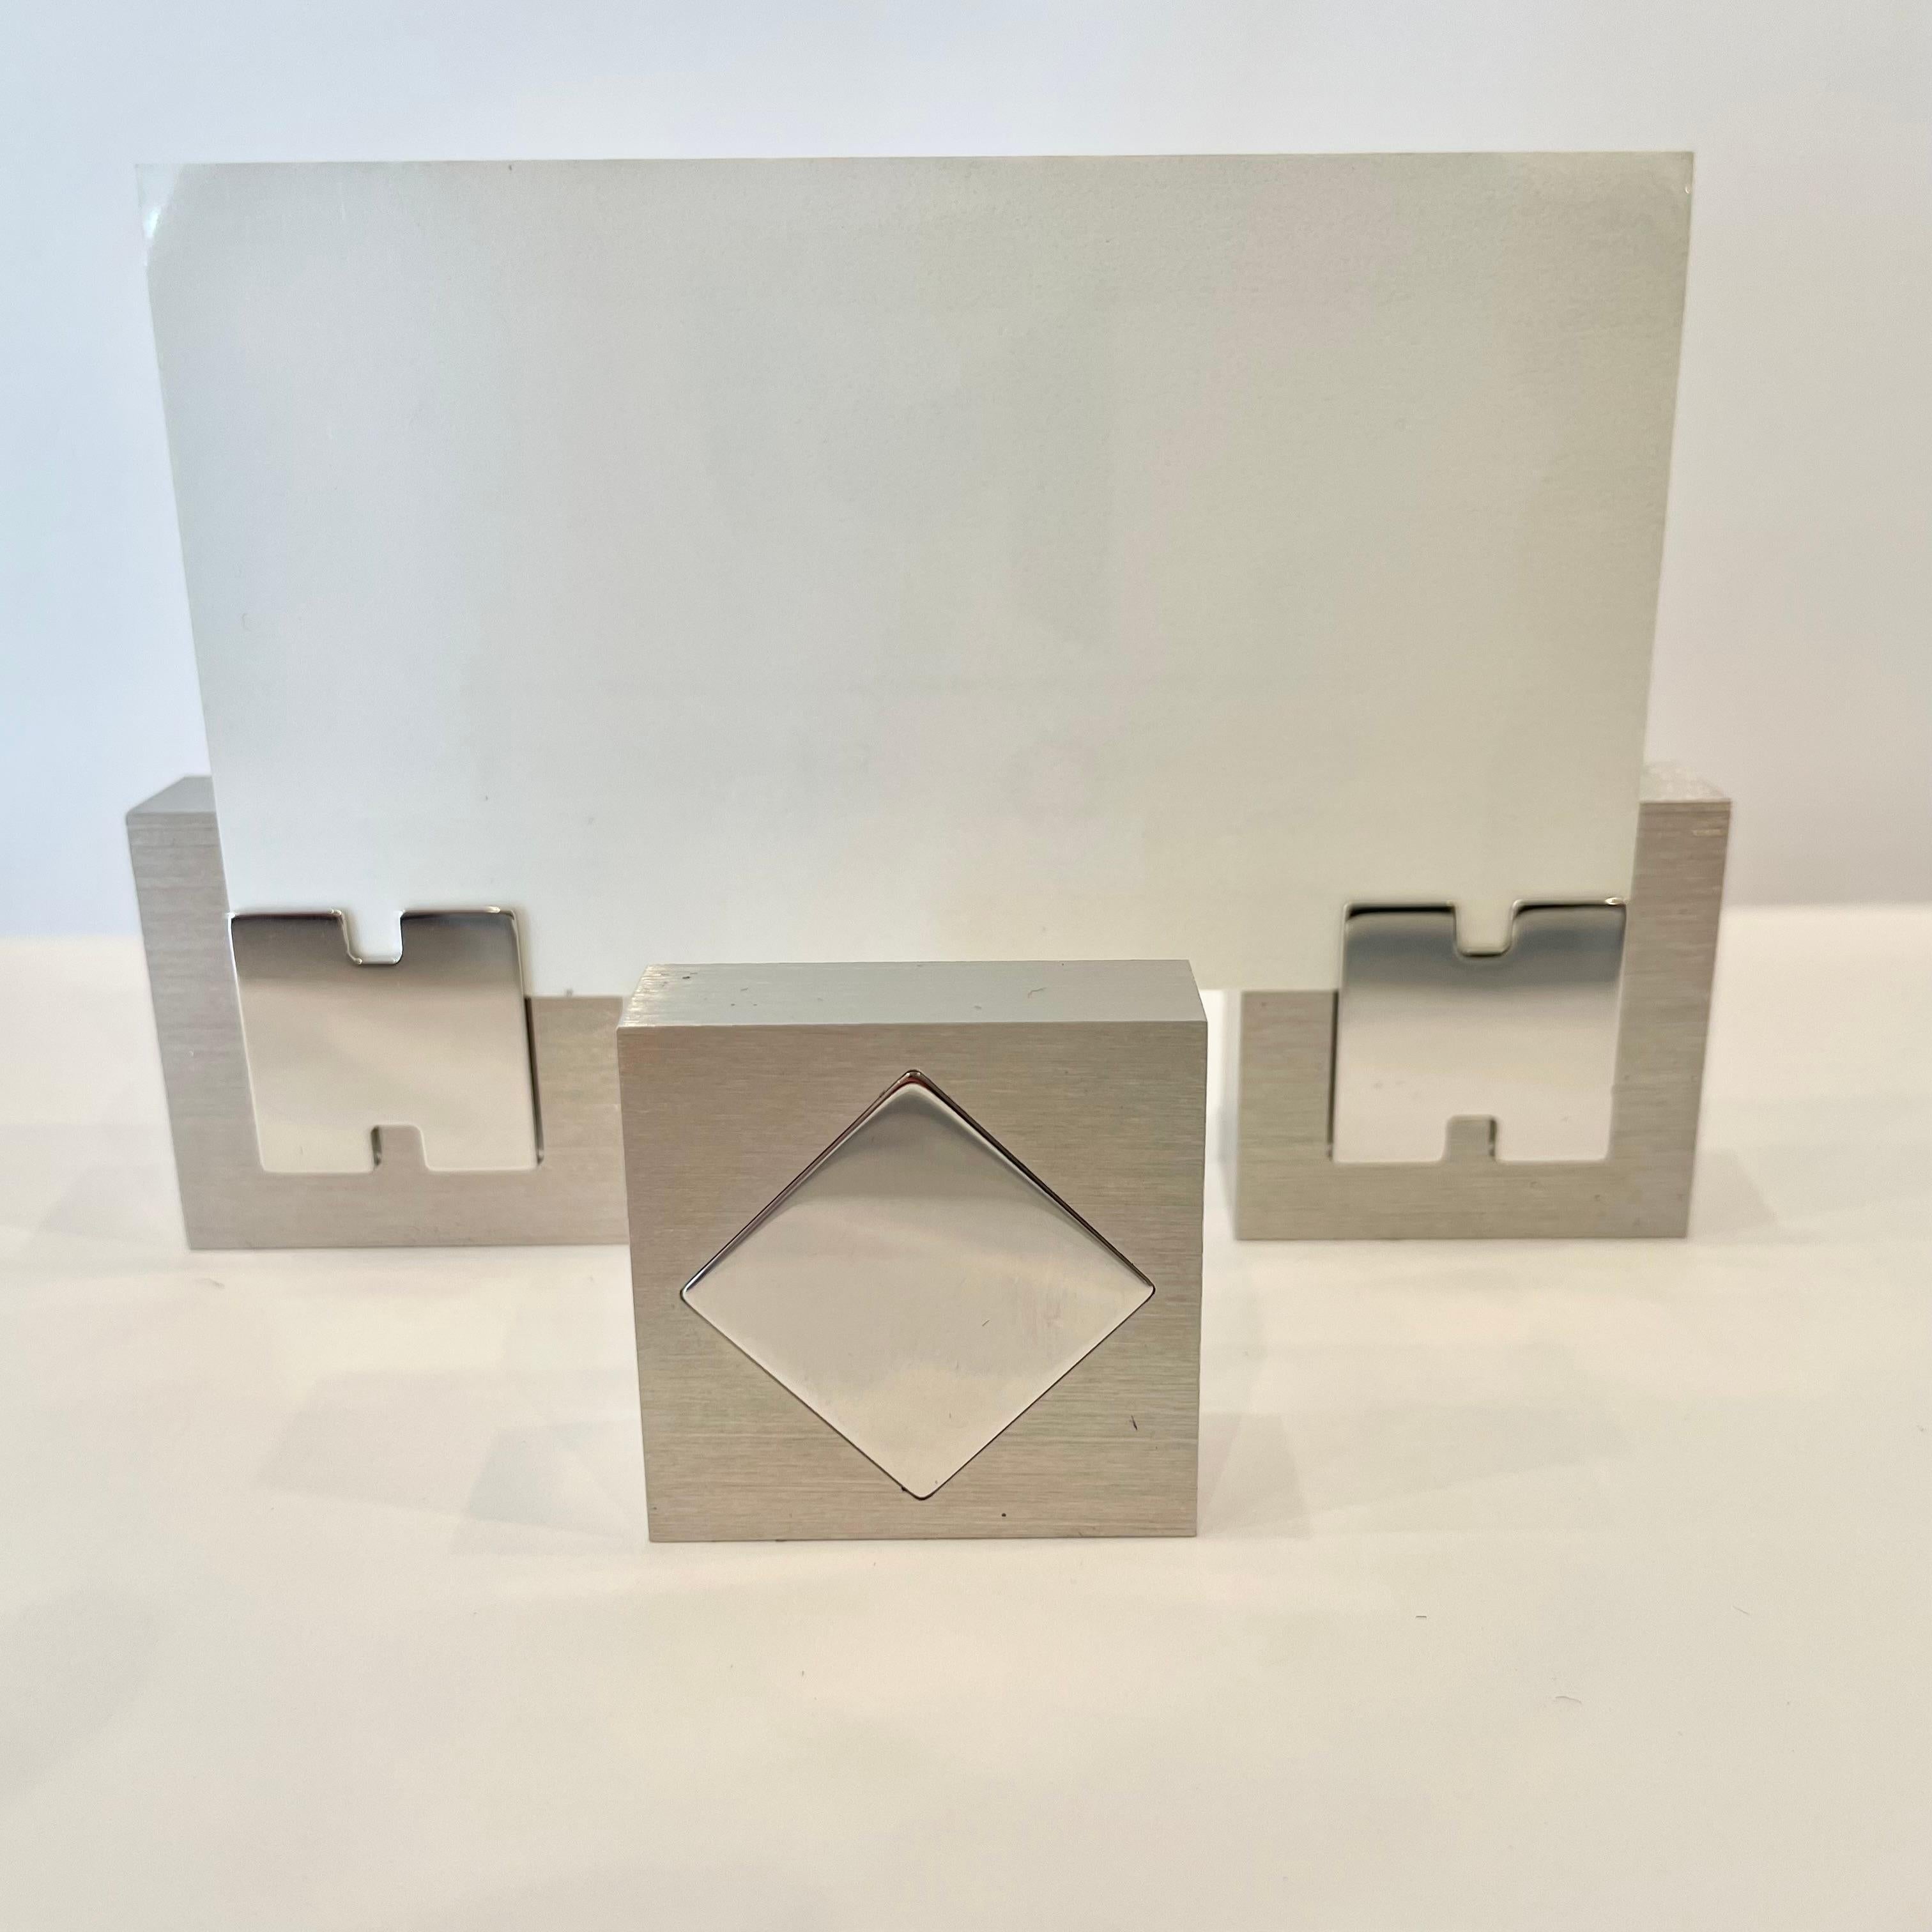 Set of 3 Hermes Place Card Holders, 1990s France In Good Condition For Sale In Los Angeles, CA